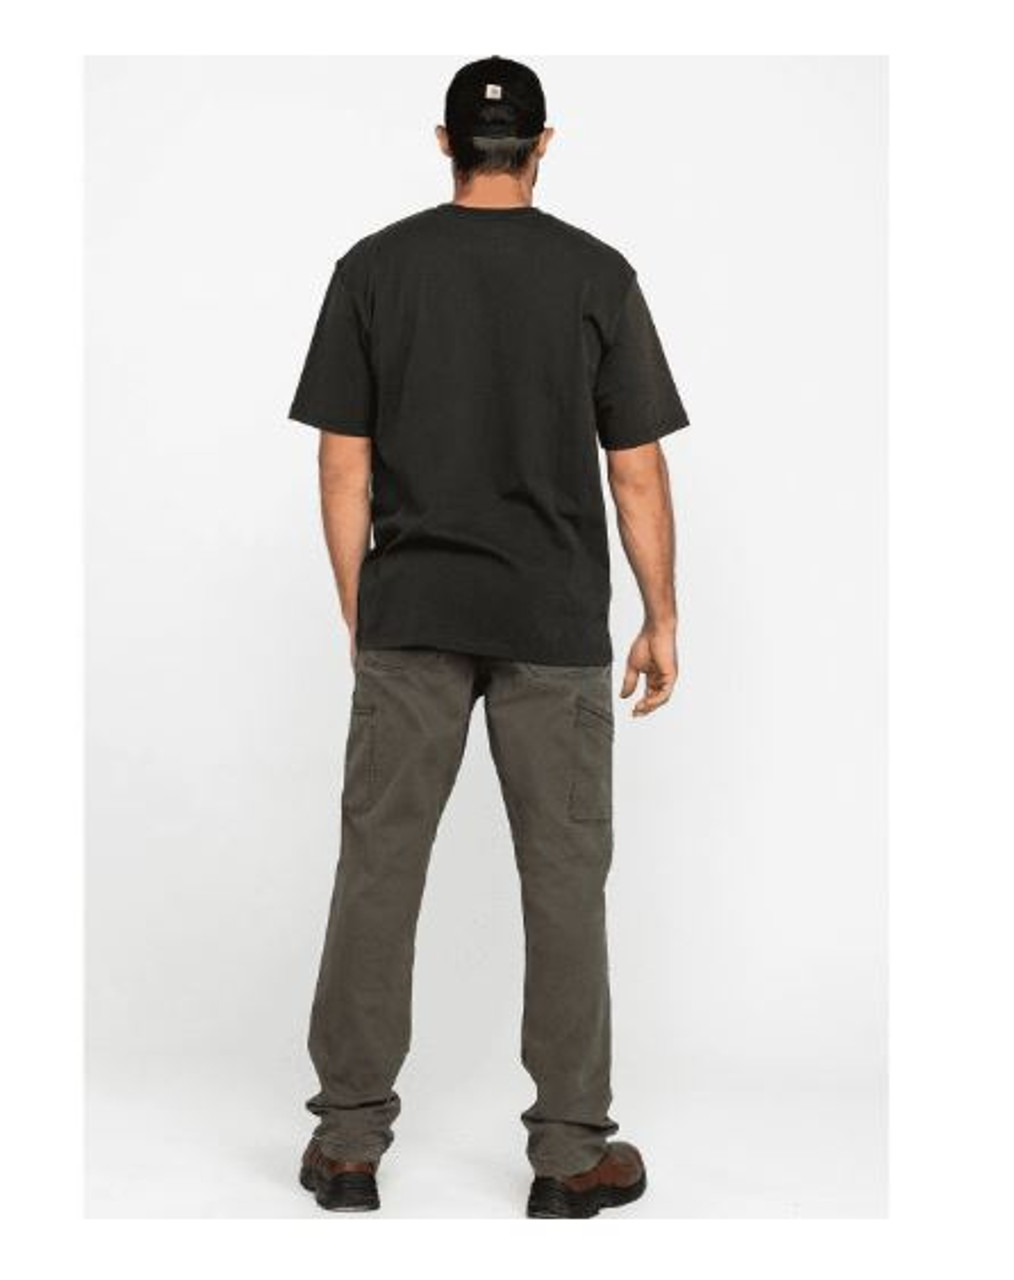 Carhartt Rugged Flex Relaxed Fit Double Front Pant - Black